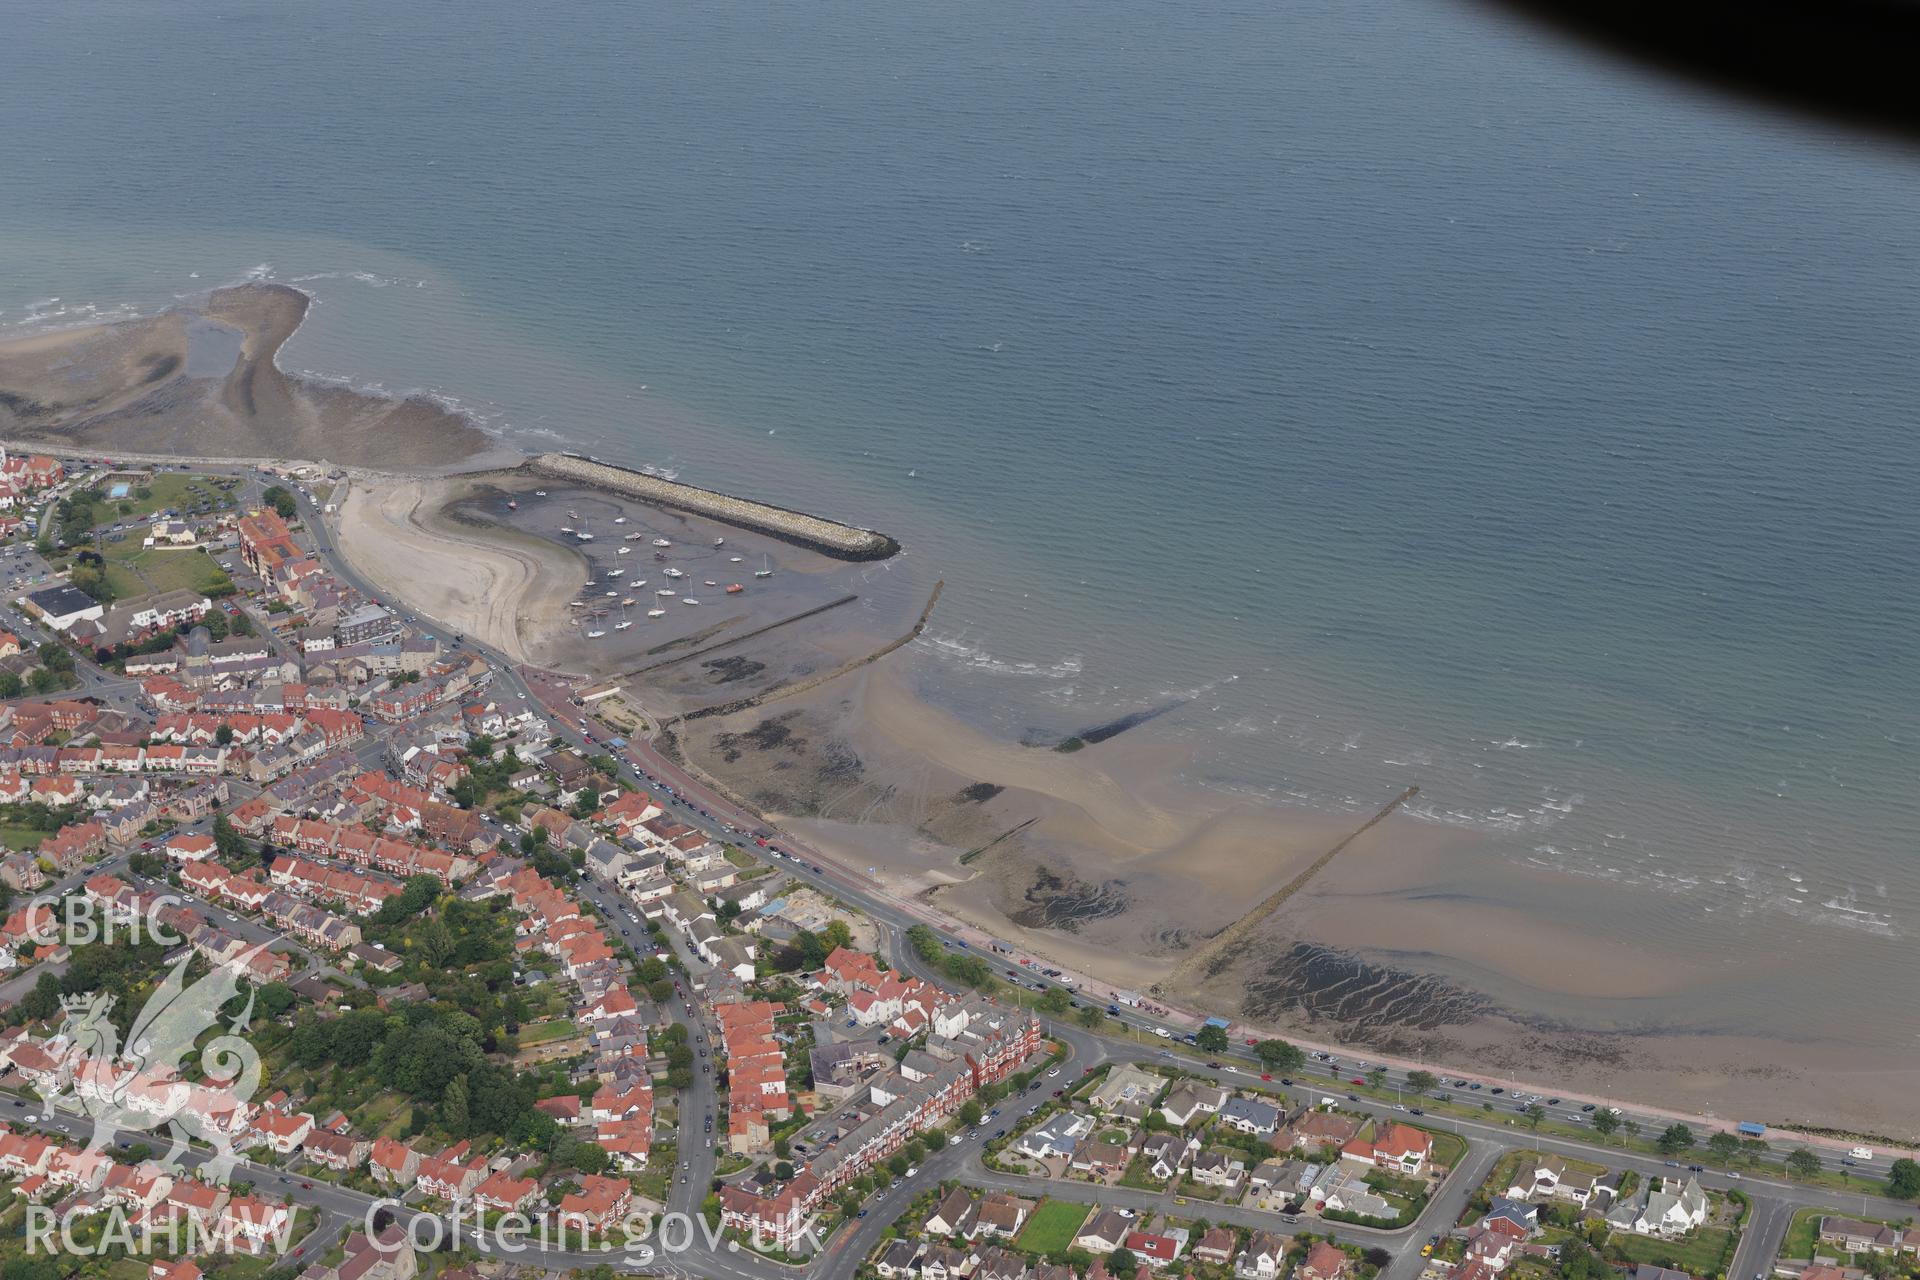 The village of Rhos-on-Sea and the fishtrap just off the coast. Oblique aerial photograph taken during the Royal Commission's programme of archaeological aerial reconnaissance by Toby Driver on 11th September 2015.